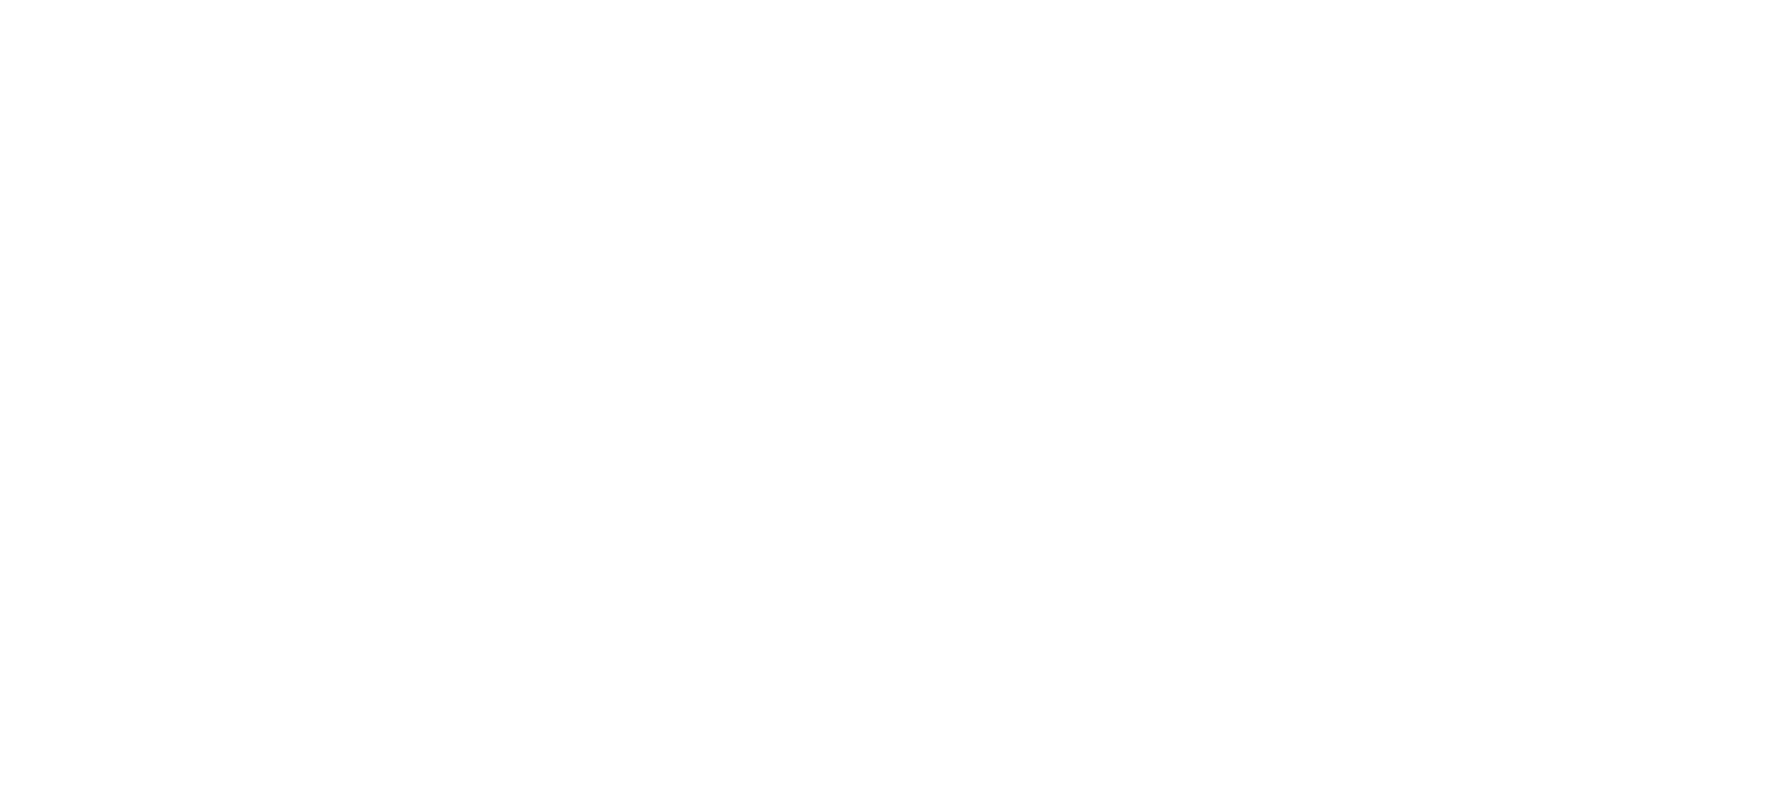 JJs Pub - Beer And Fine Drinks